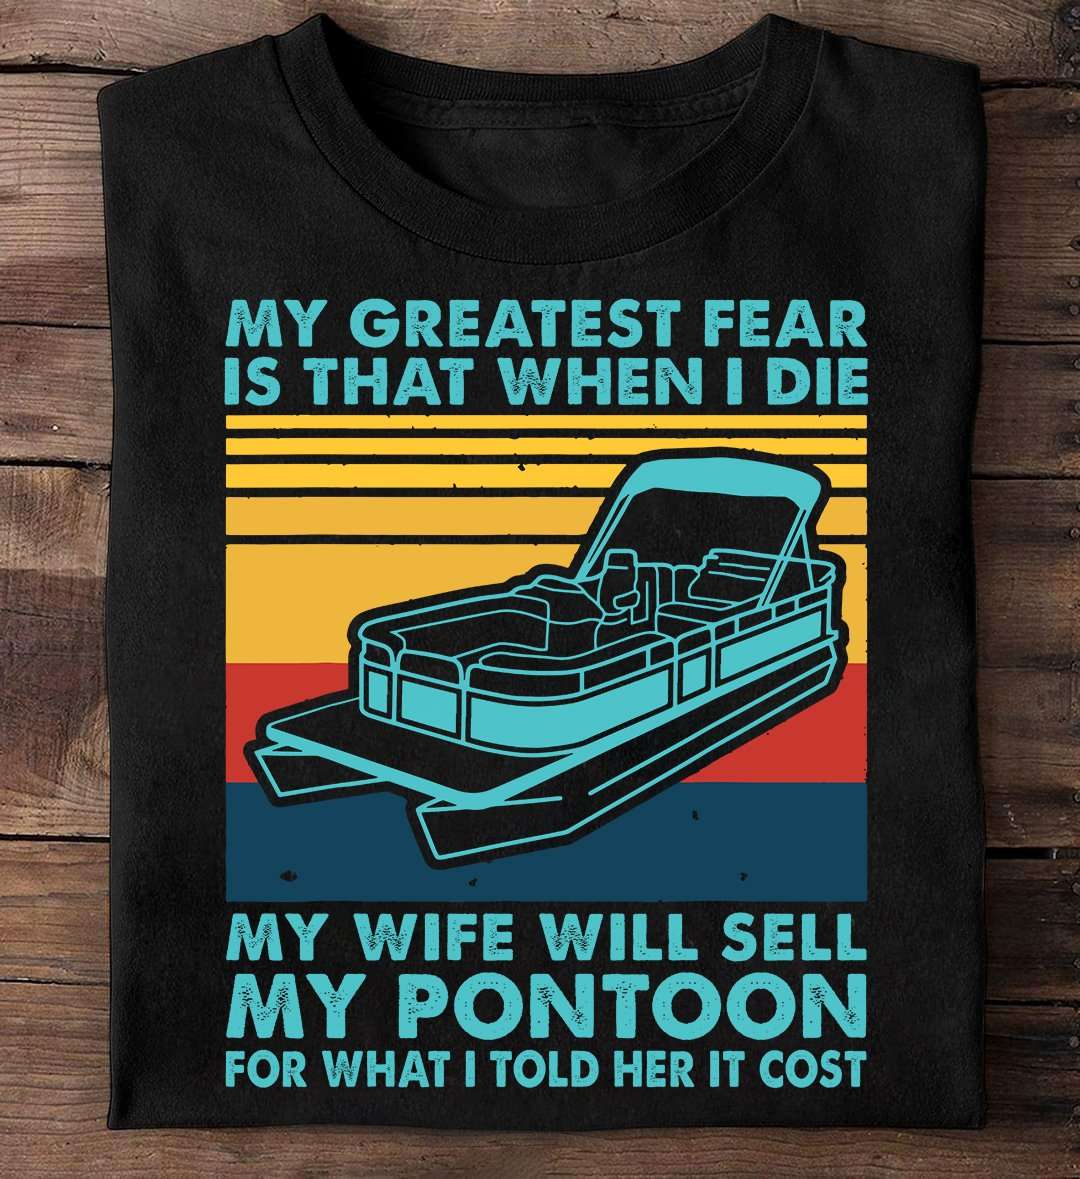 My greatest fear is that when I die my wife will sell my pontoon - Husband and wife, love pontooning